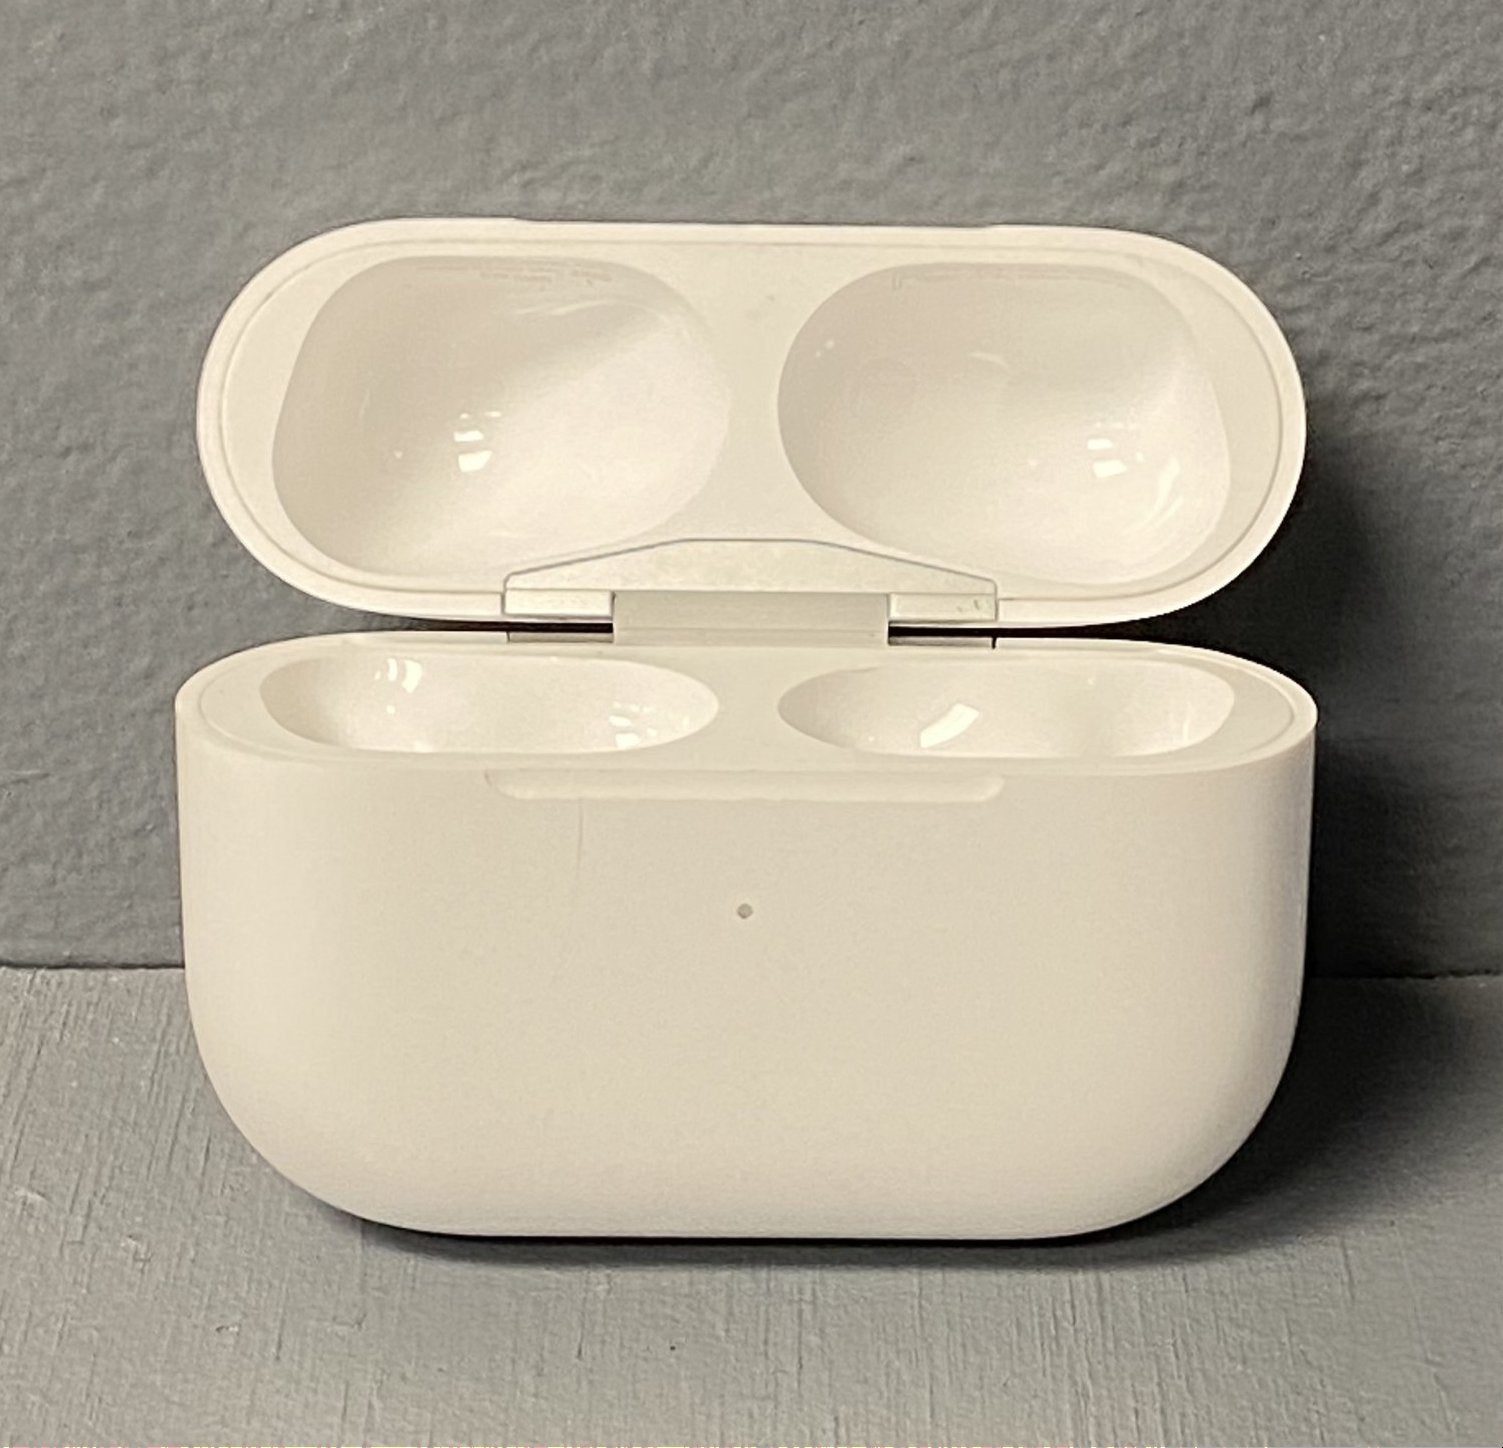 Apple Airpods Pro 1st Gen Charging Case Only A2190 – PayMore